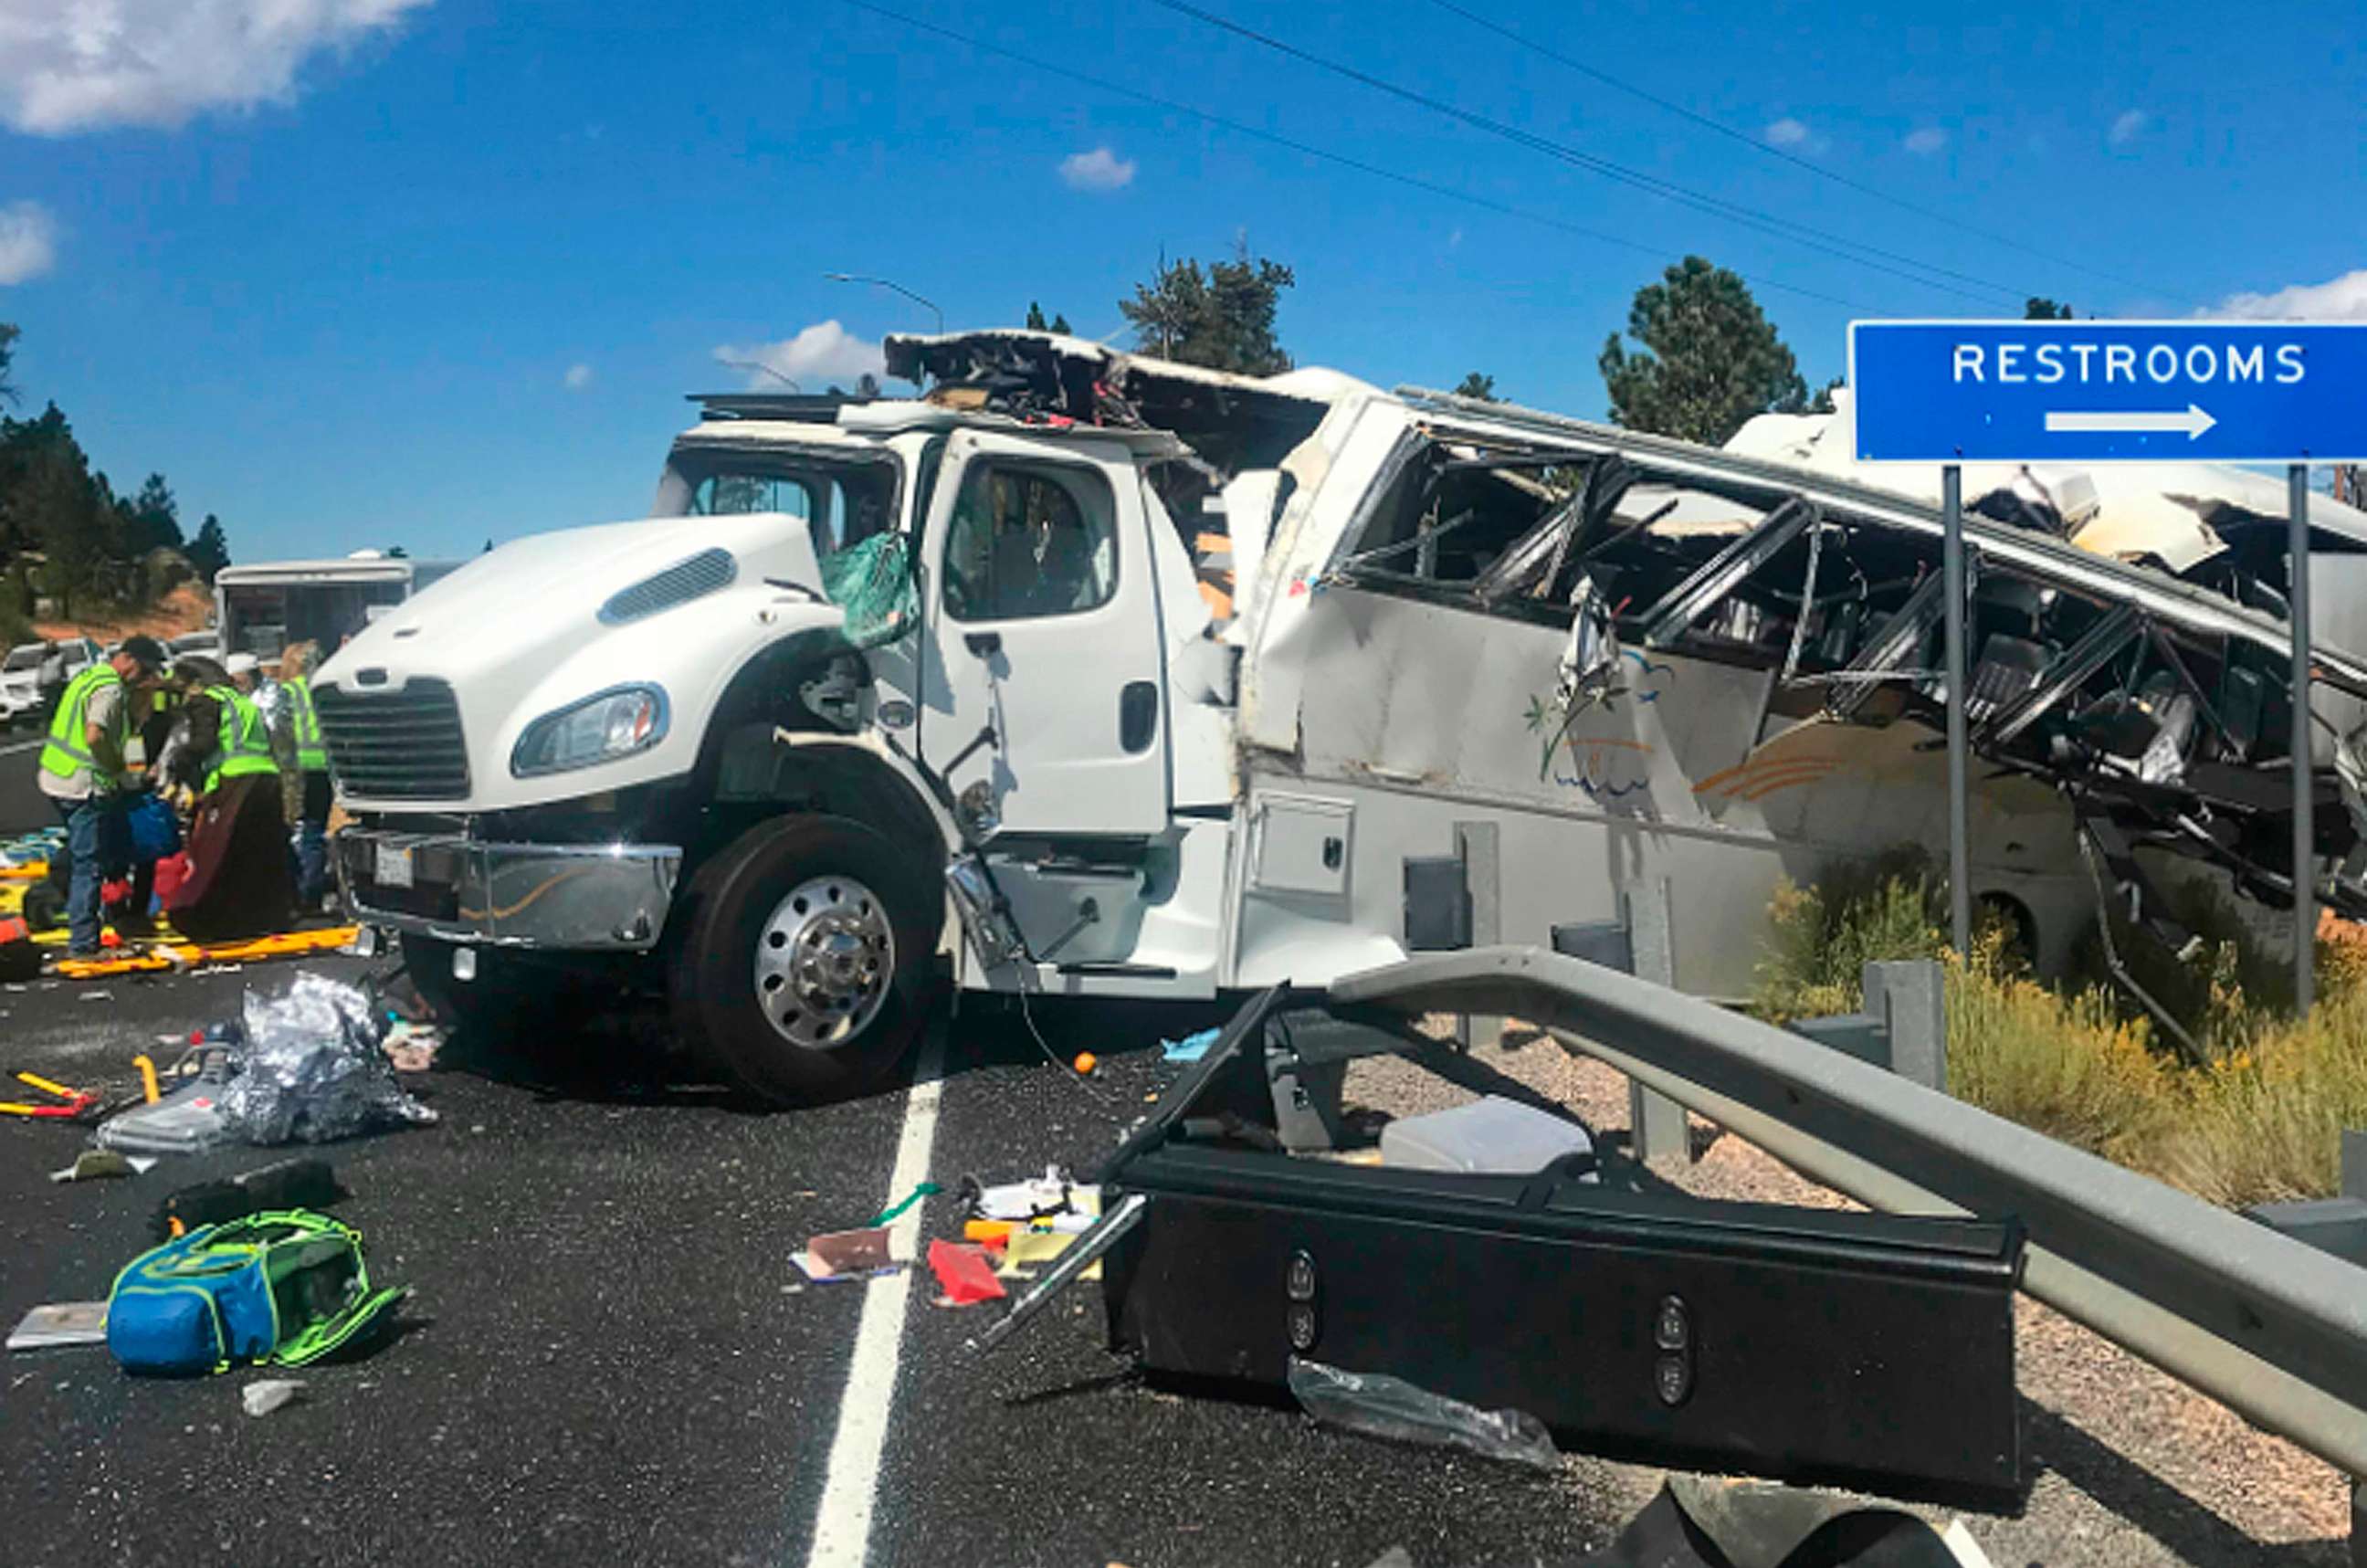 PHOTO: This photo released by the Garfield County Sheriff's Office shows a tour bus after it crashed near Bryce Canyon National Park in southern Utah, killing at least four people and critically injuring up to 15 others, Sept. 20, 2019.